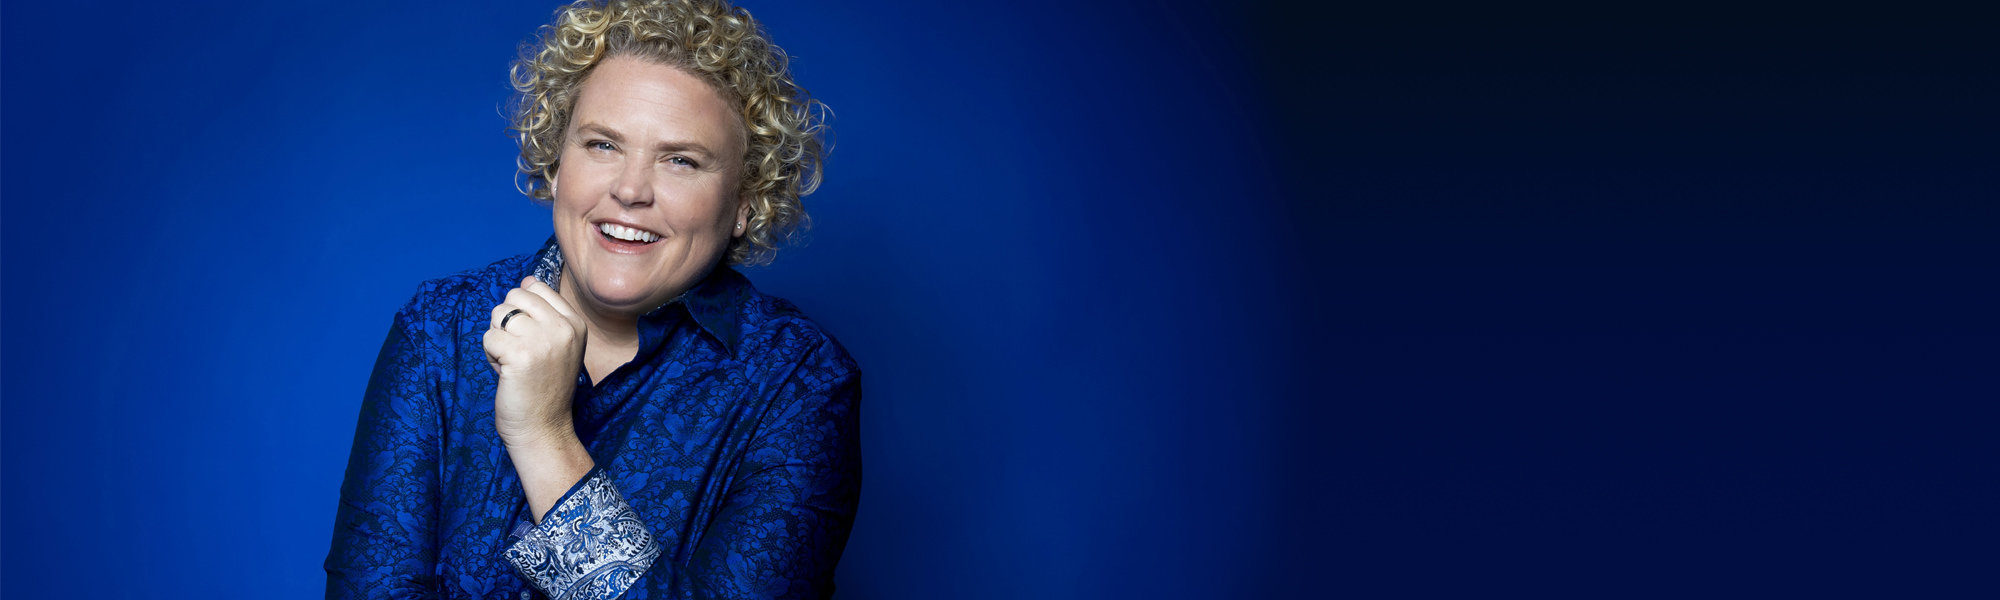 Comedian Fortune Feimster in front of a vivid blue background wearing a blue paisley shirt.